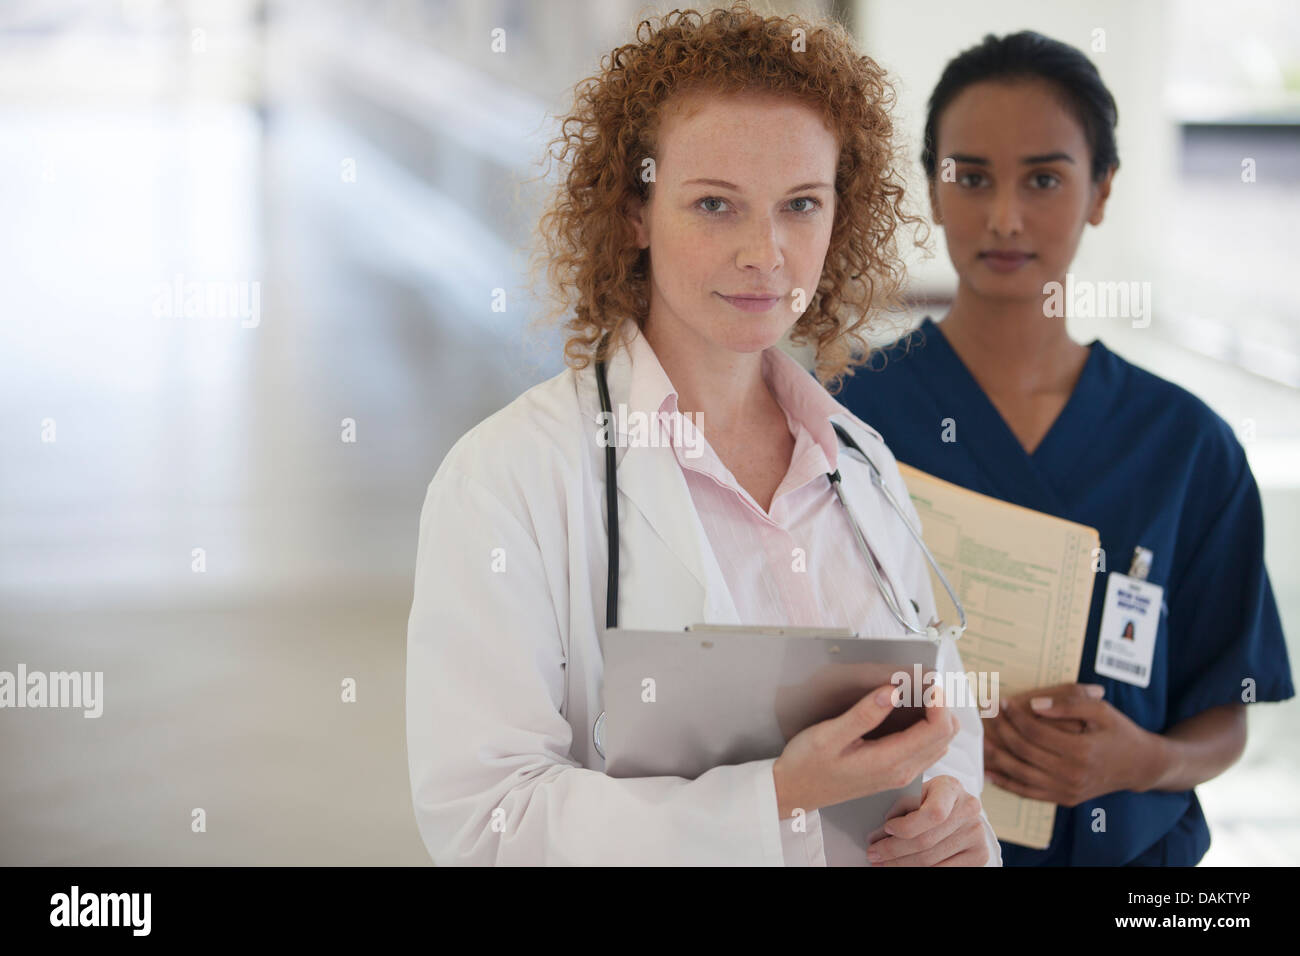 Doctor and nurse standing in hallway Stock Photo